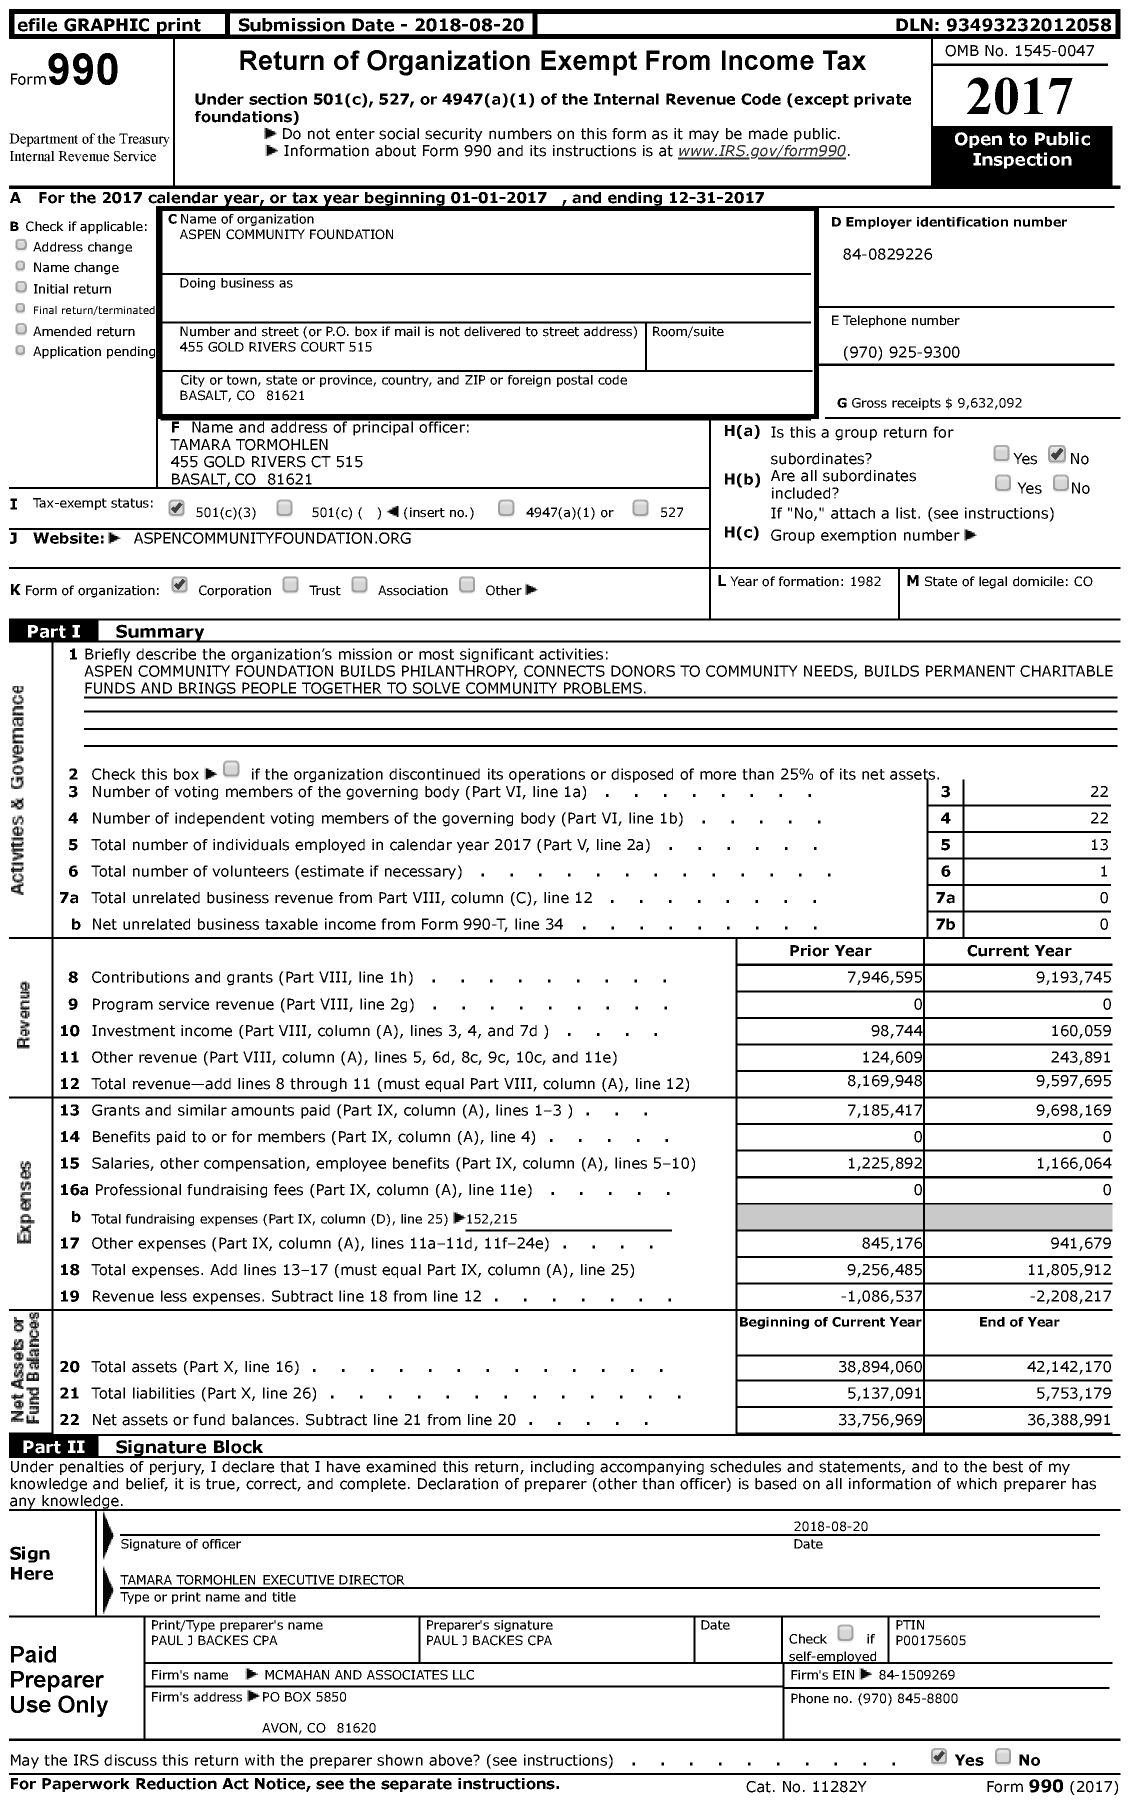 Image of first page of 2017 Form 990 for Aspen Community Foundation (ACF)